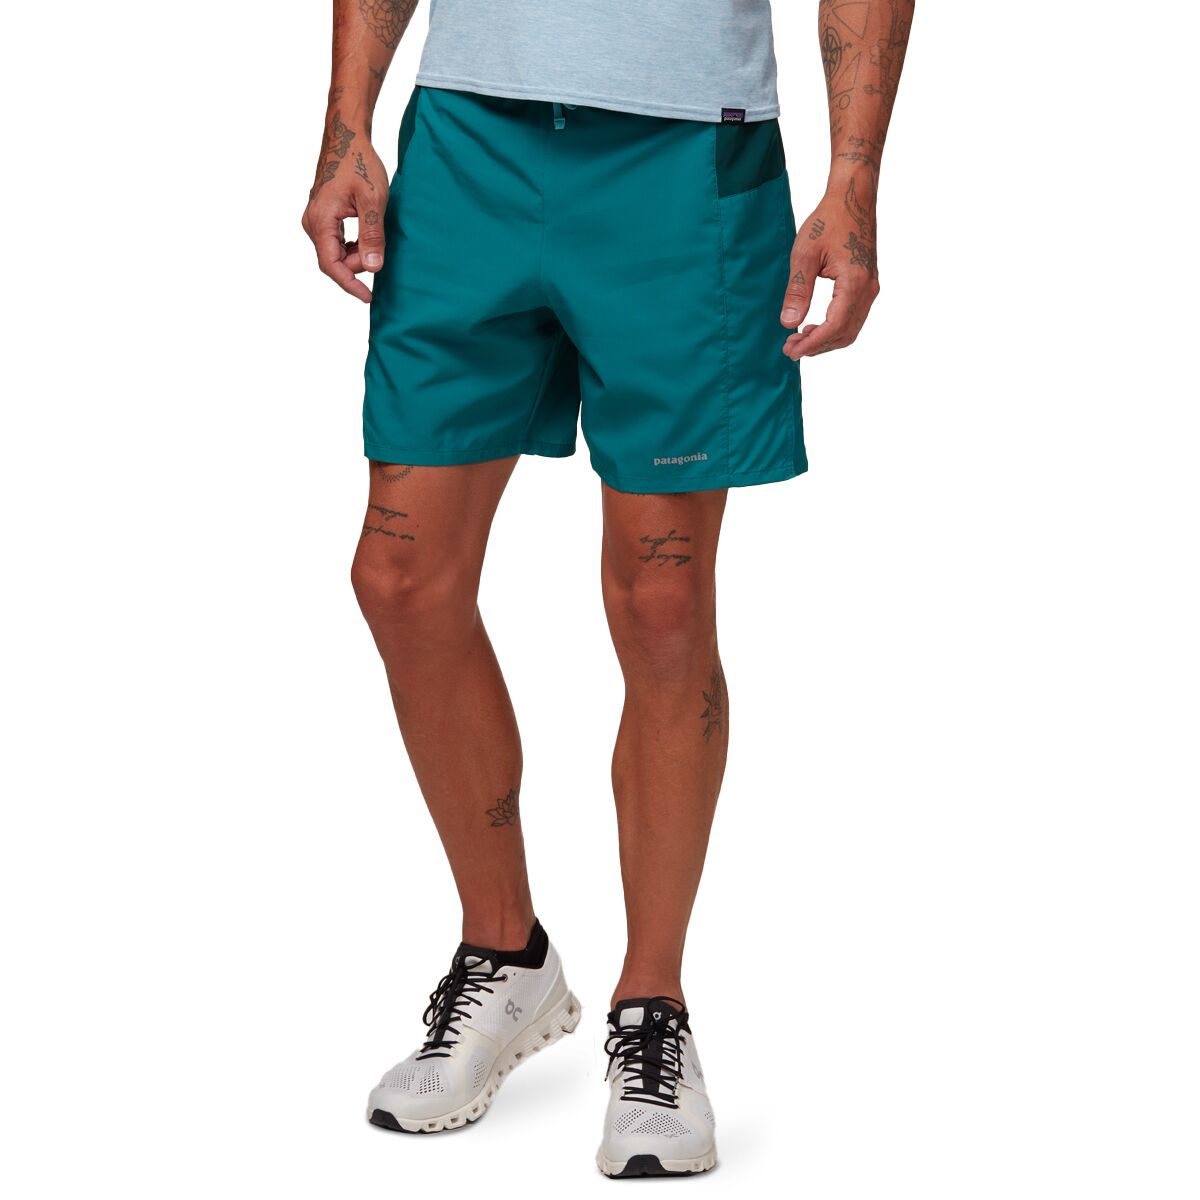 Patagonia Strider Pro 7in Shorts - Men's | Backcountry.com